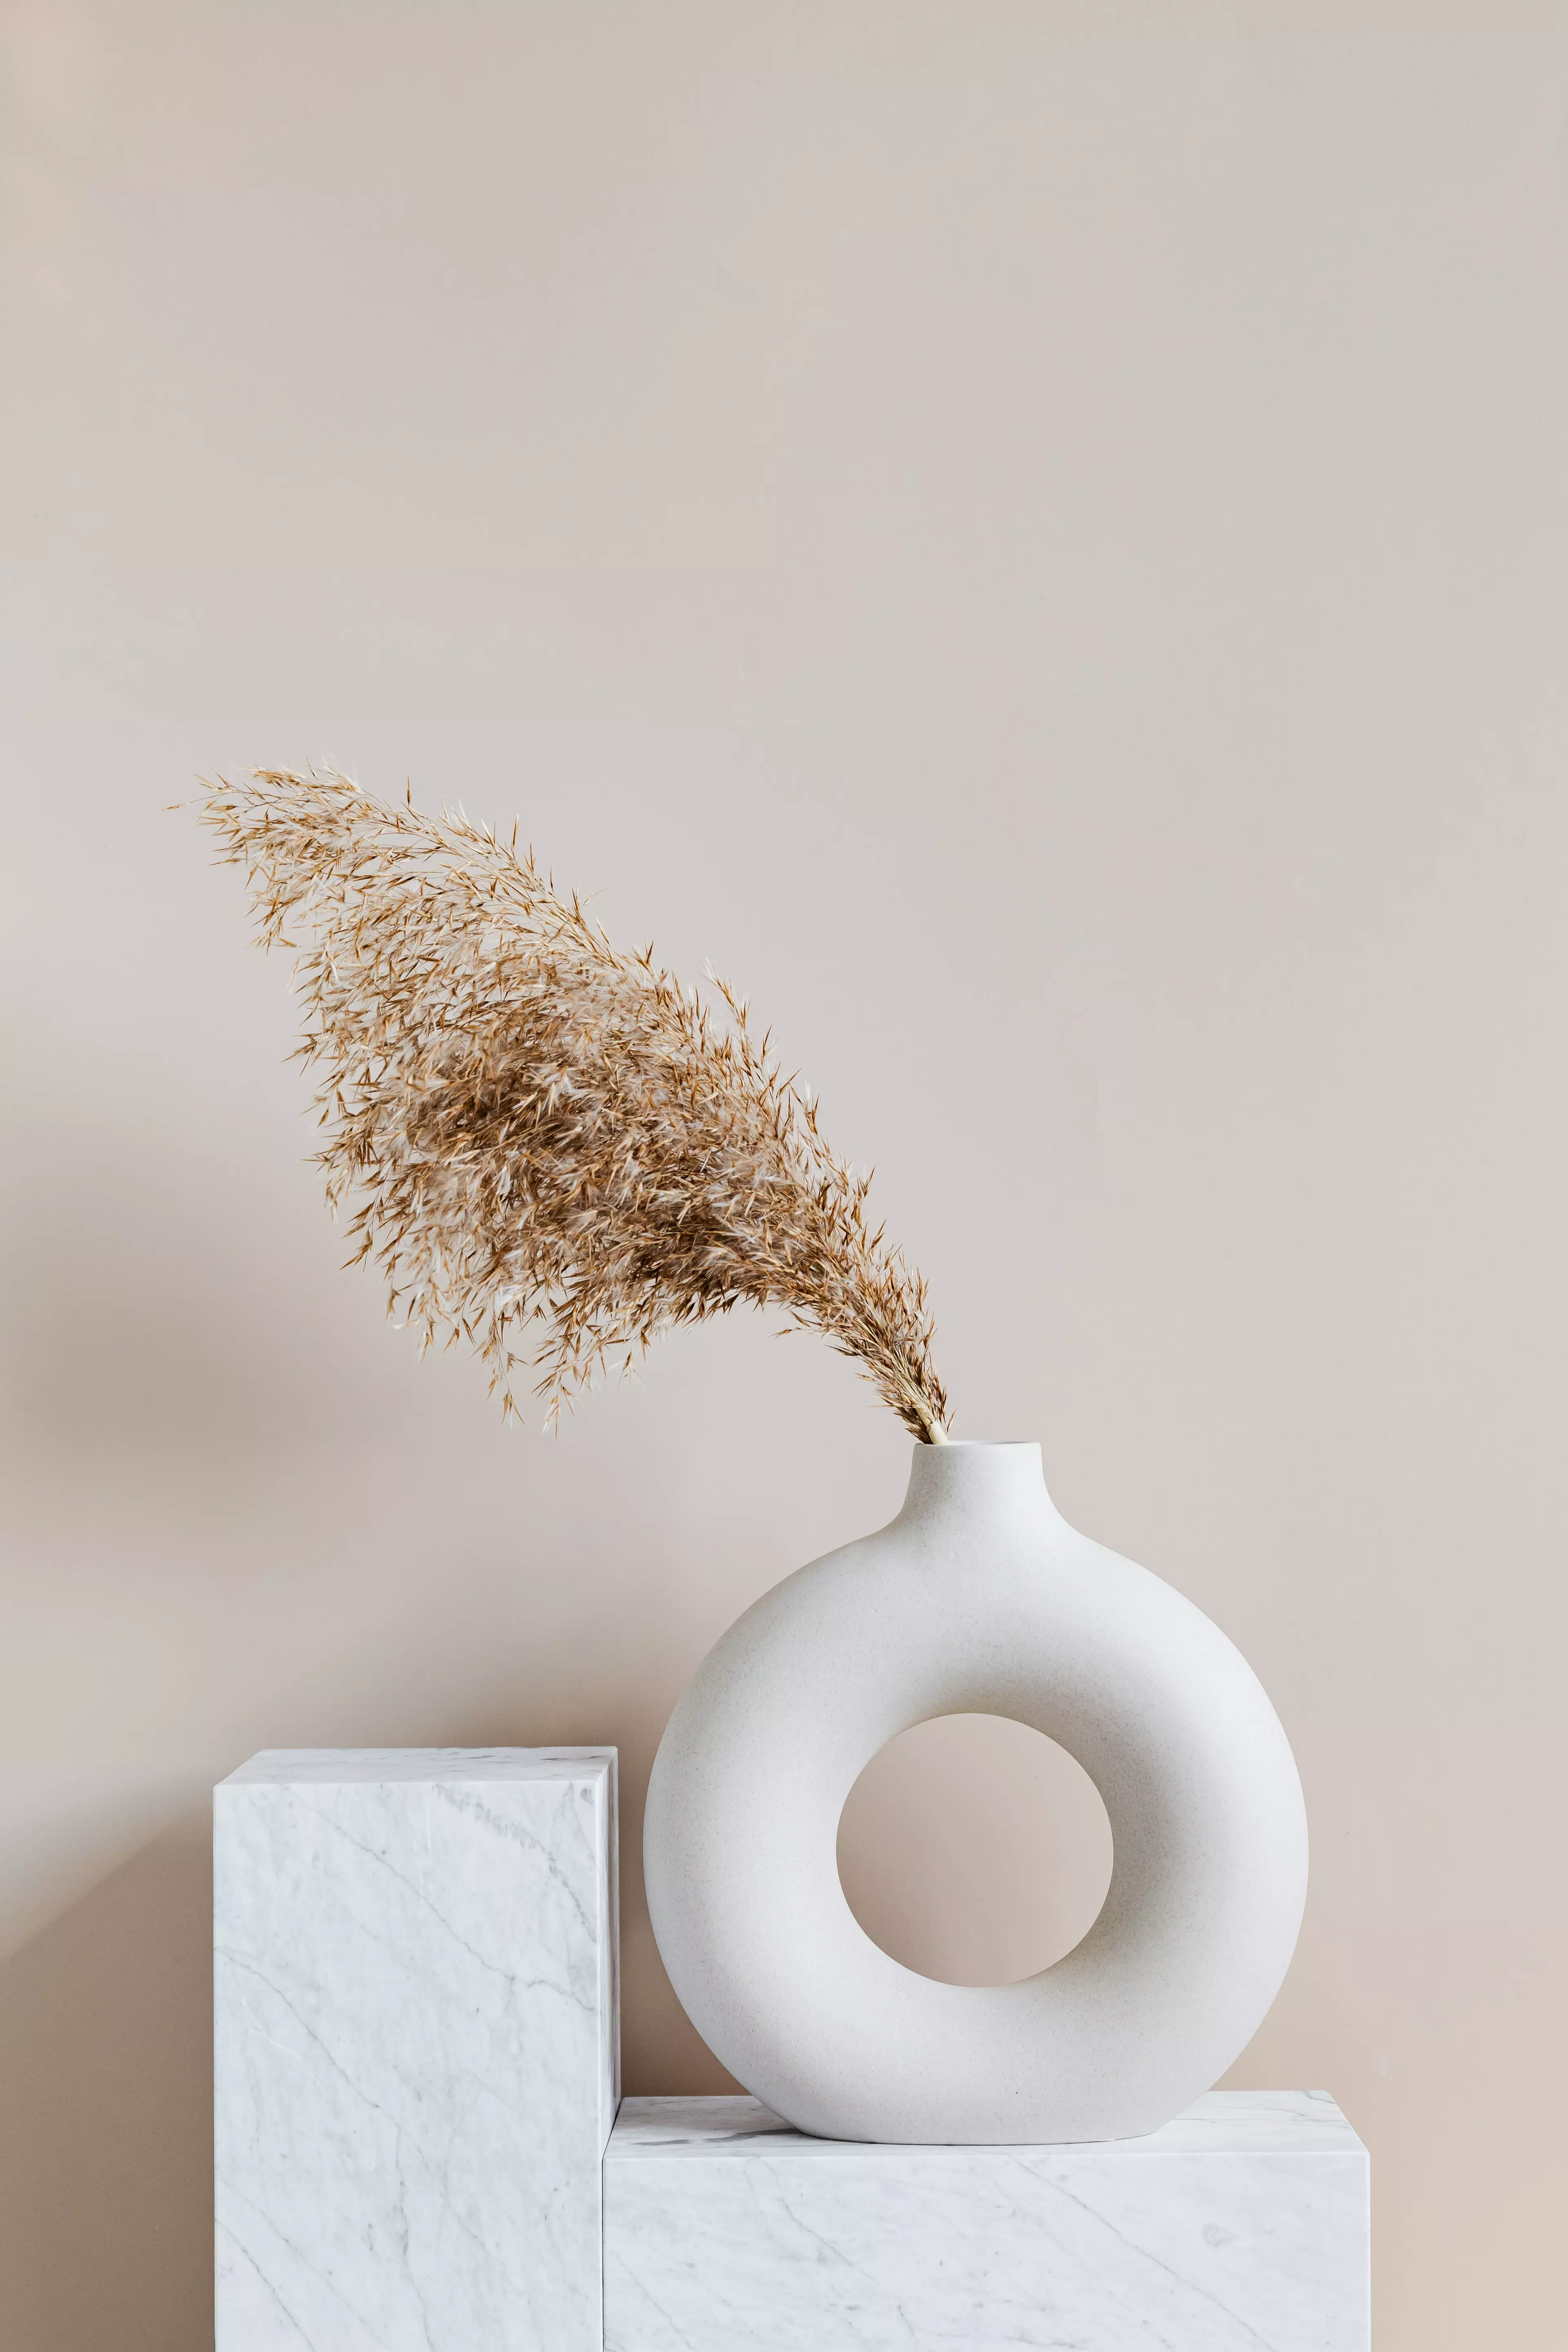 Pampas grass's neutral colouring and soft texture makes it great for home decor (